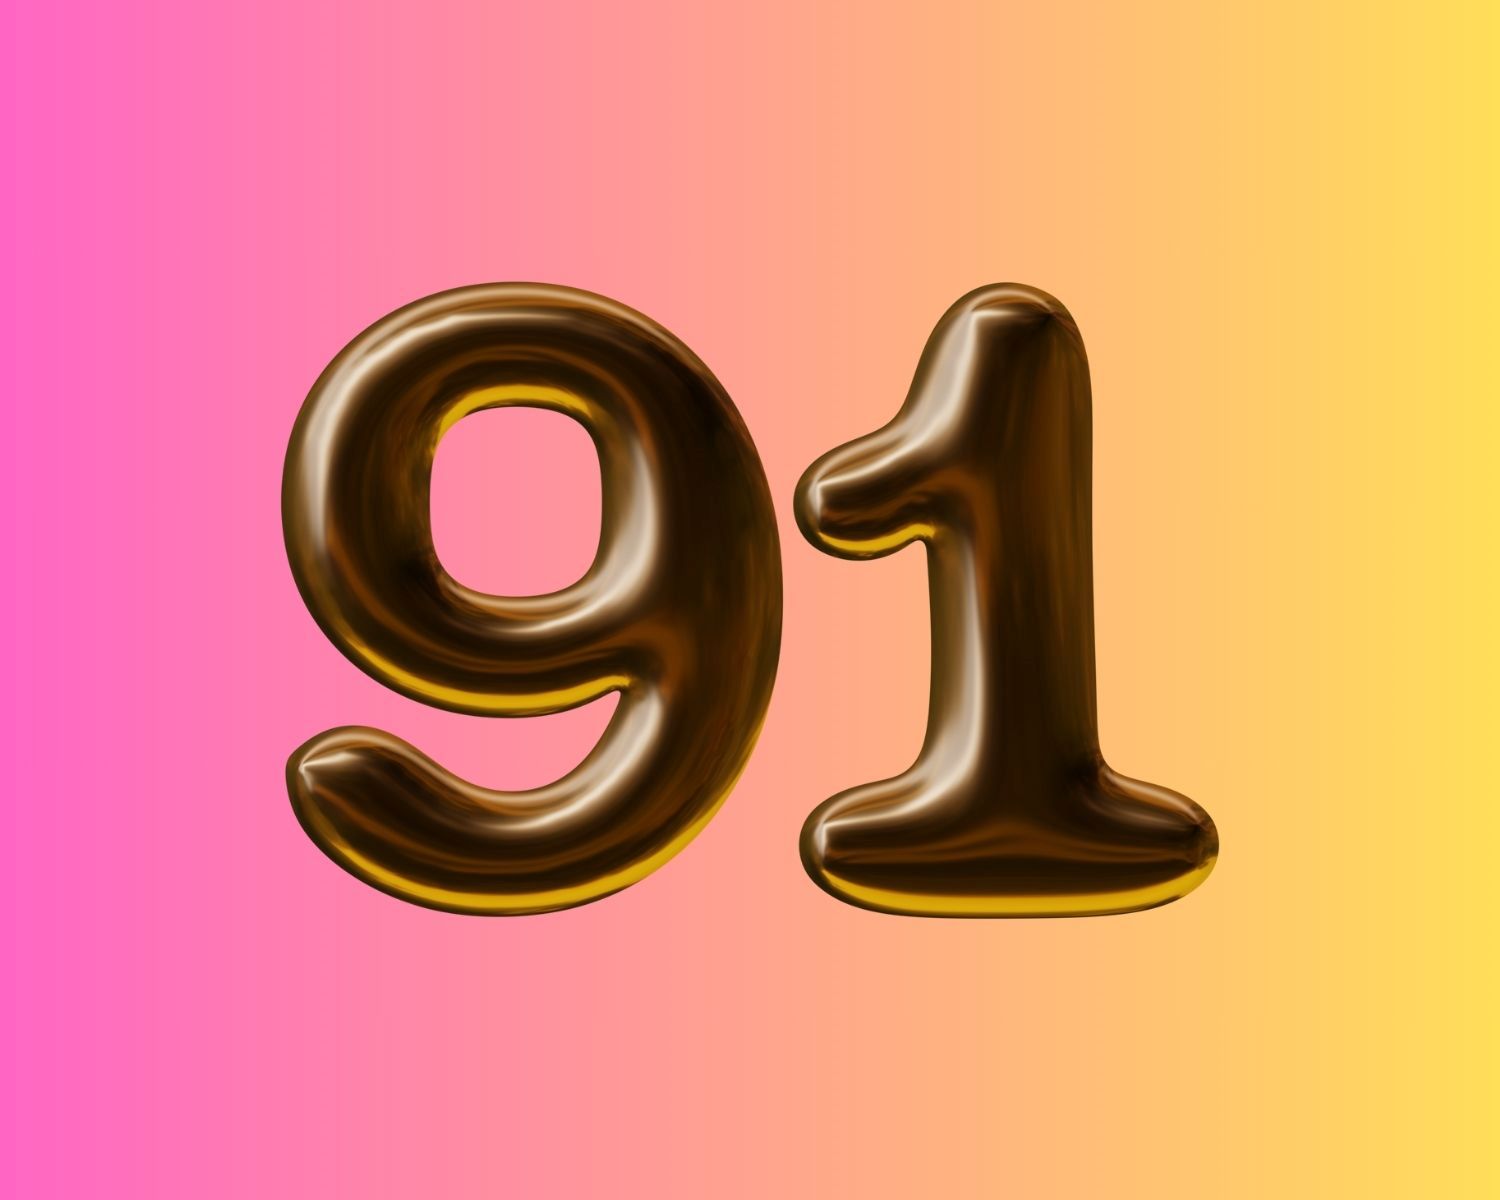 Discover The Truth: Is 91 A Prime Number?